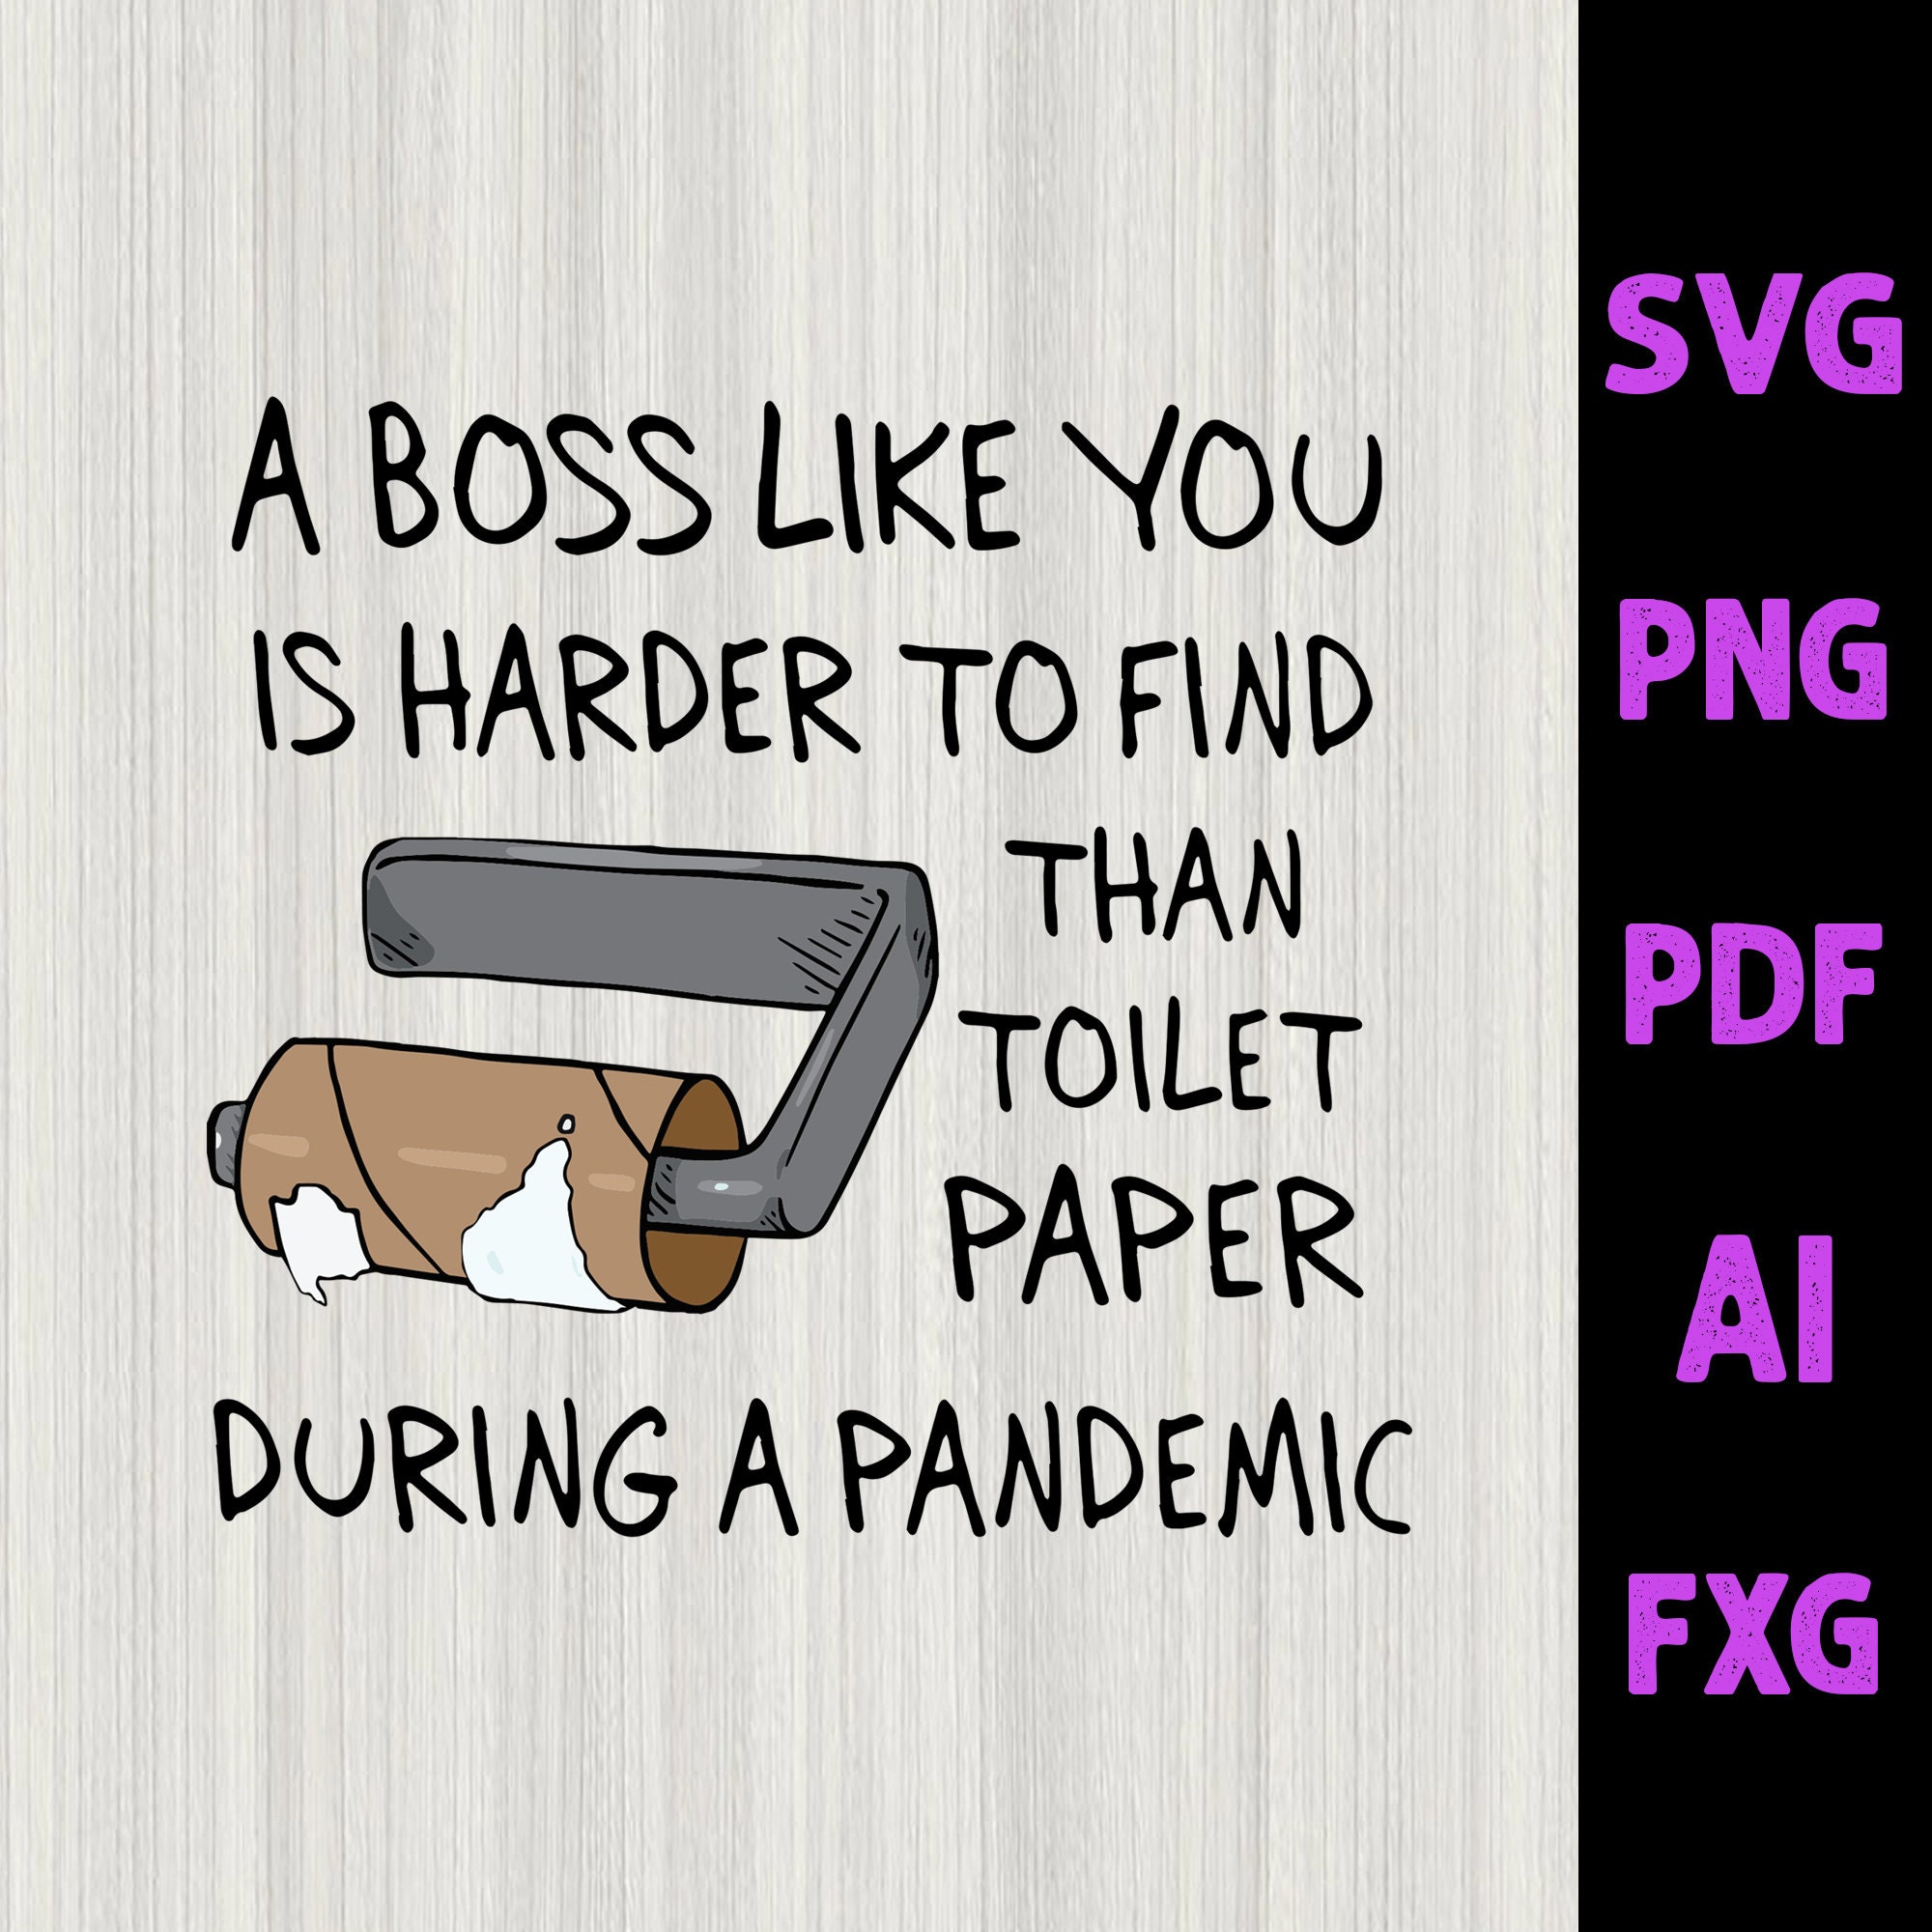 Download A Boss Like You Is Harder To Find Than A Toilet Paper Svg Etsy